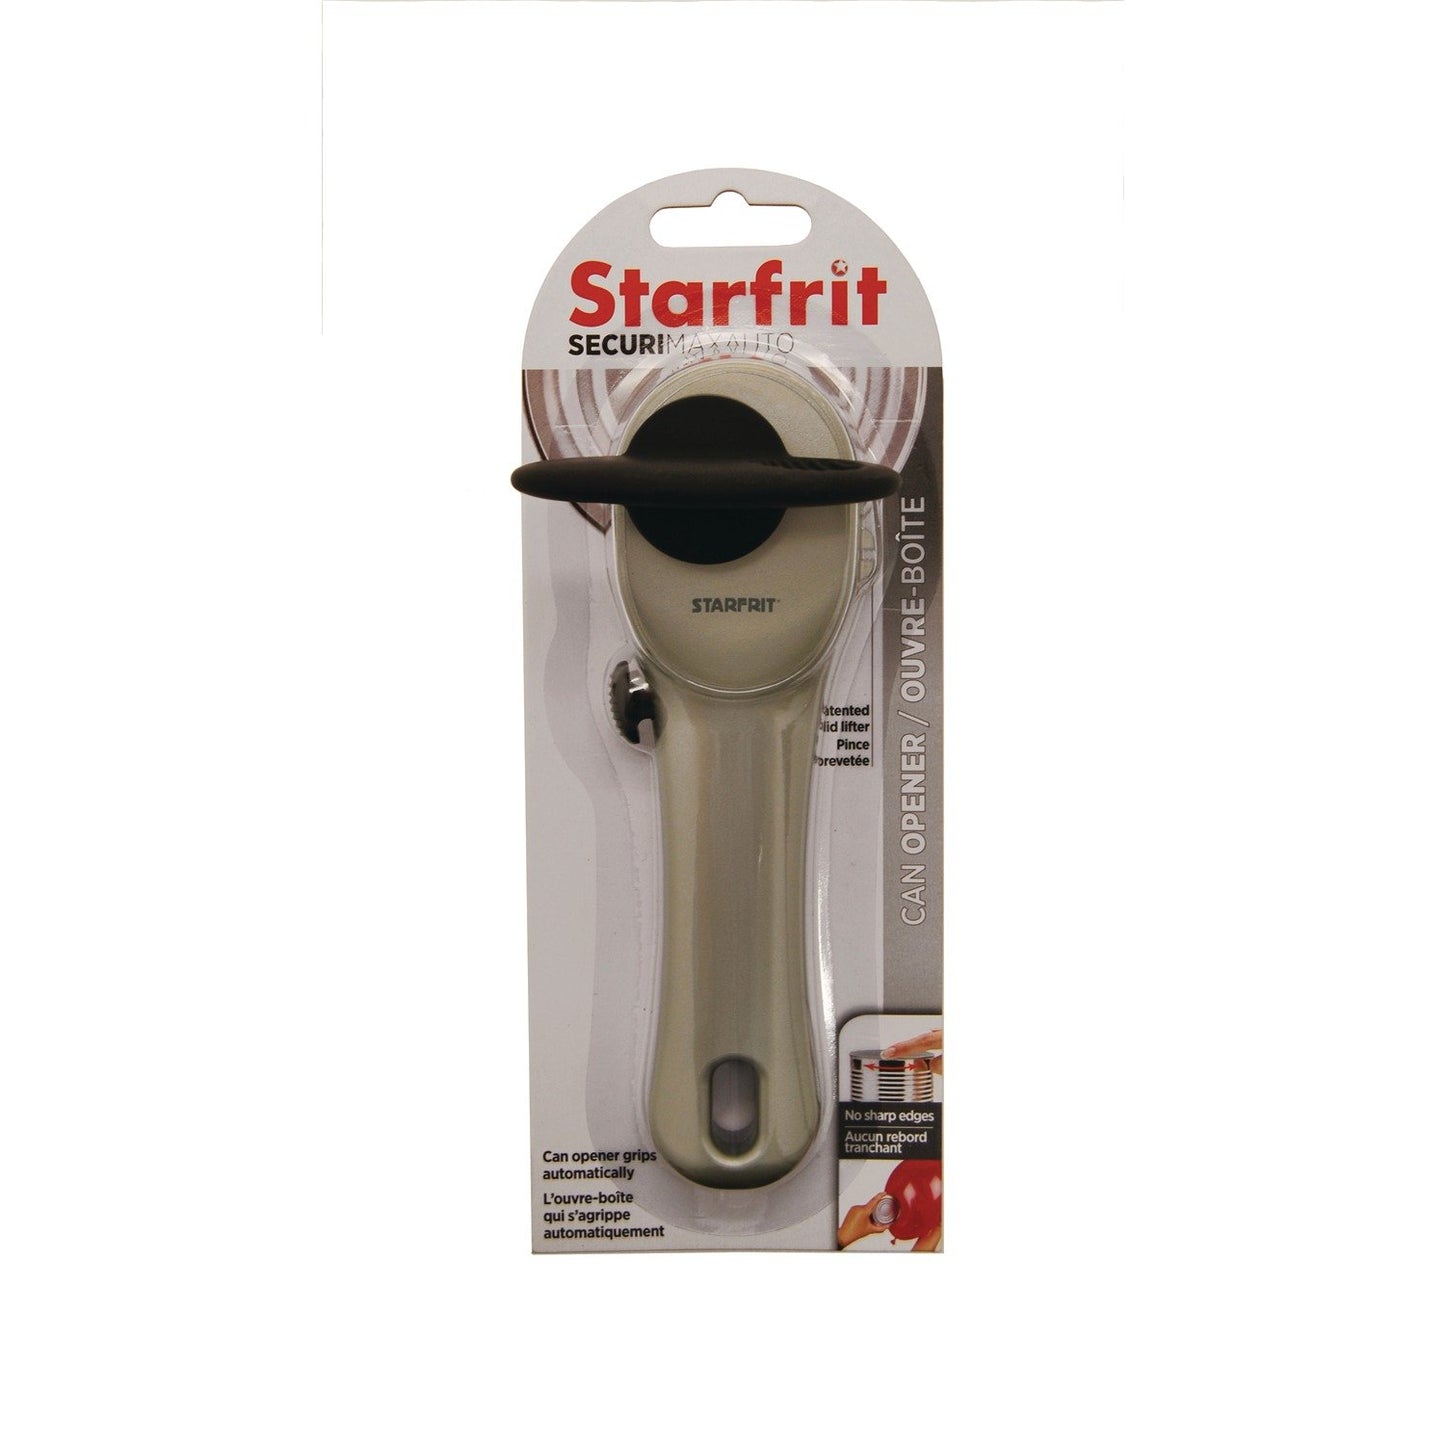 STARFRIT 93008-006-0000 Securimax Auto Can Opener